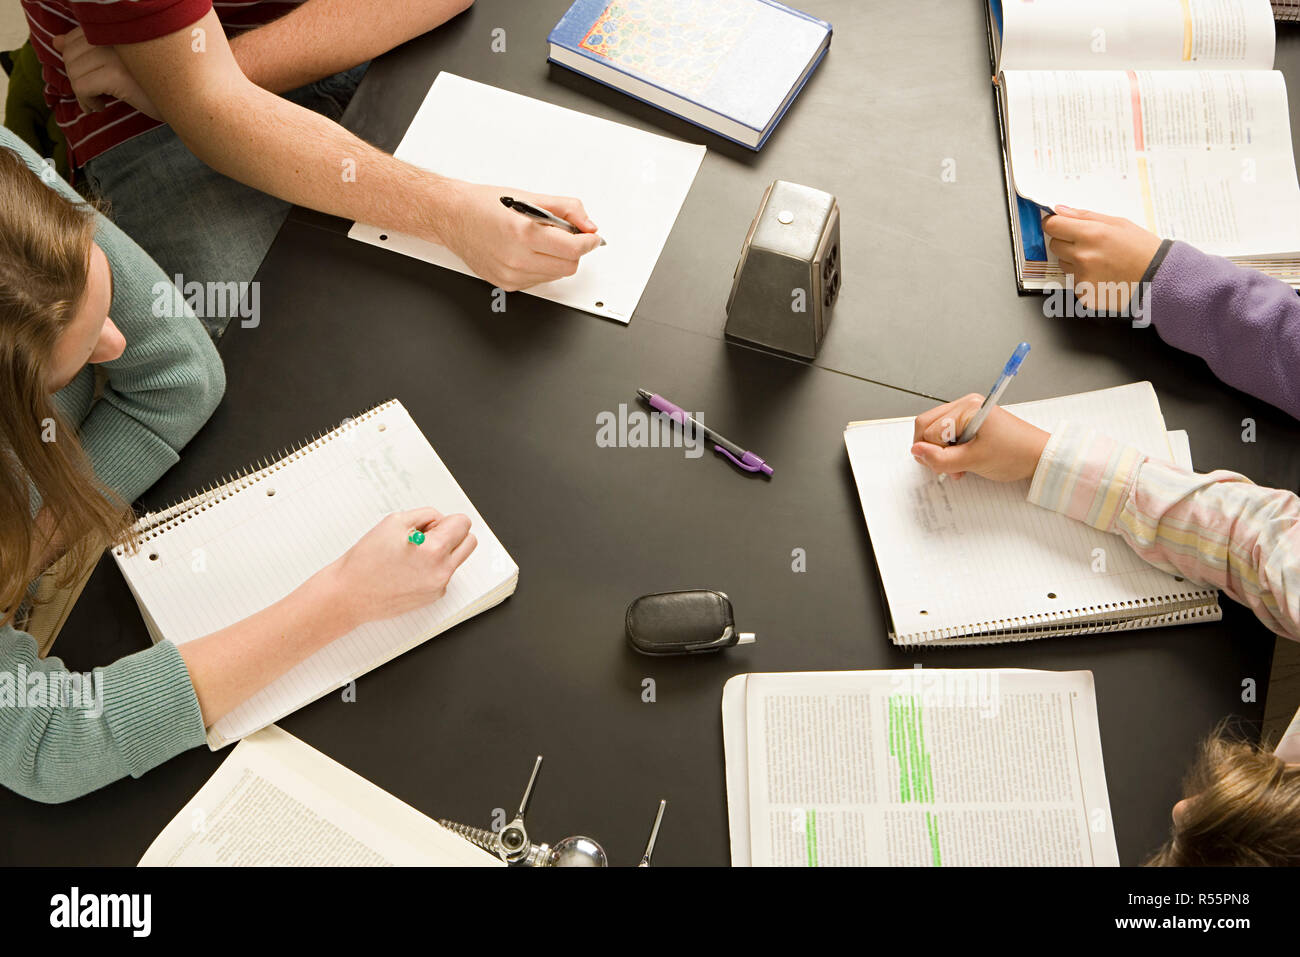 Four students working in a classroom Stock Photo